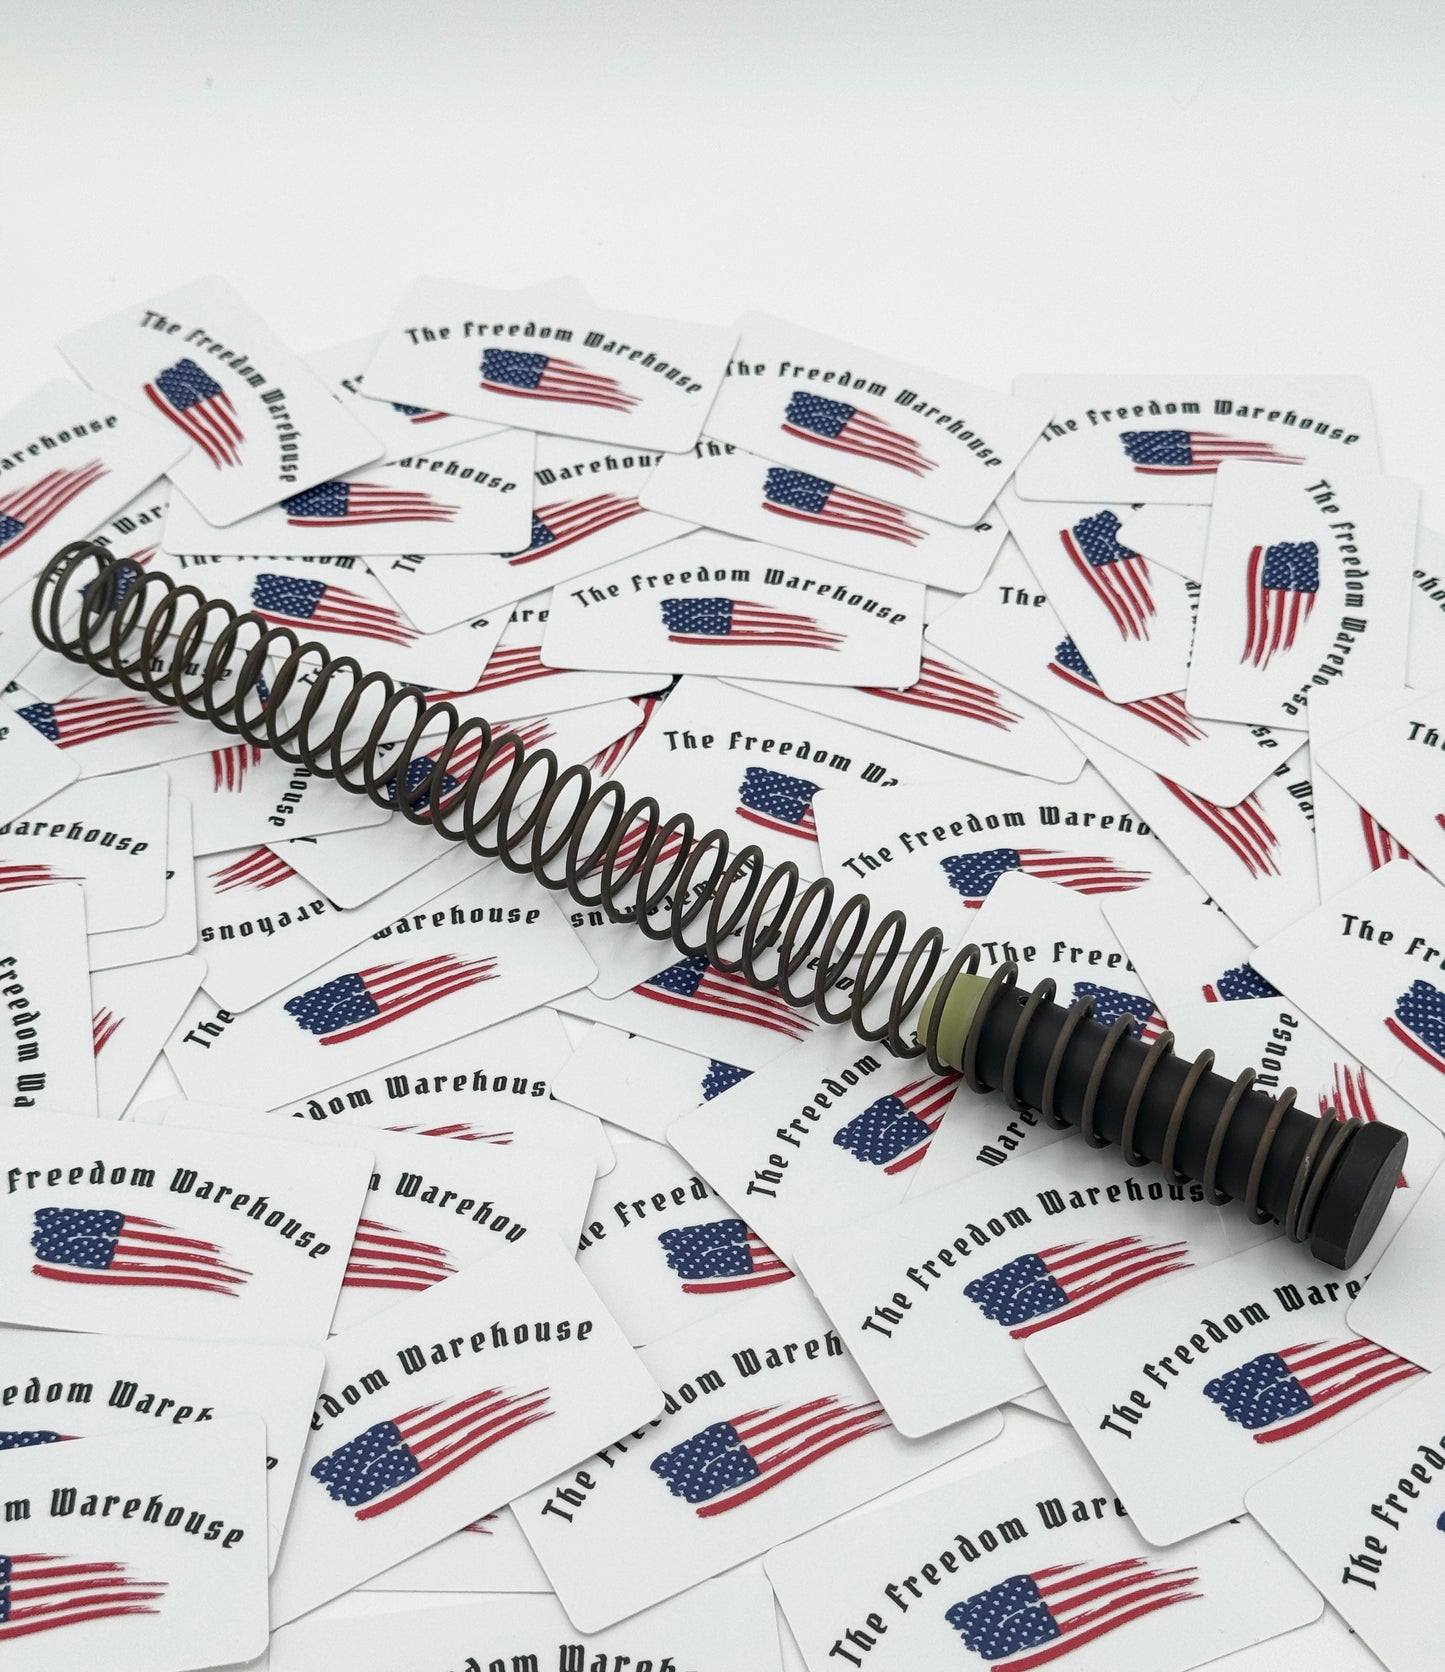 17-7 Stainless Steel AR15 Carbine Buffer Spring and Carbine Buffer (3oz)